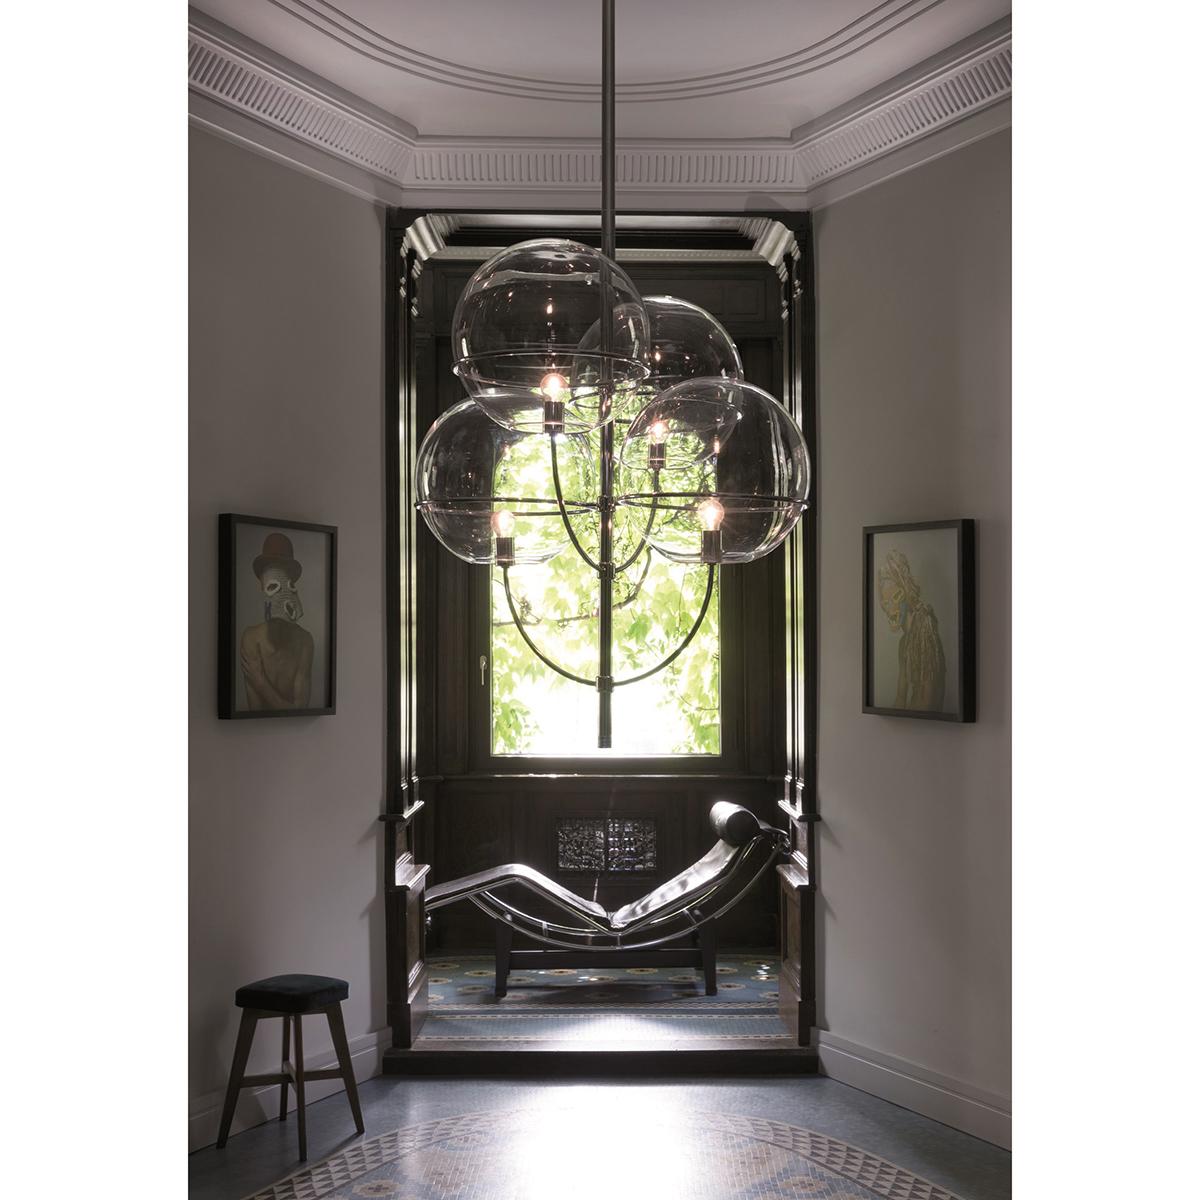 Suspension lamp 'Lyndon' designed by Vico Magistretti in 1977.
Indoor suspension lamp. Metal structure, globes in transparent glass. Manufactured by Oluce, Italy.

Lyndon is a project by Vico Magistretti created in 1977 and developed over the